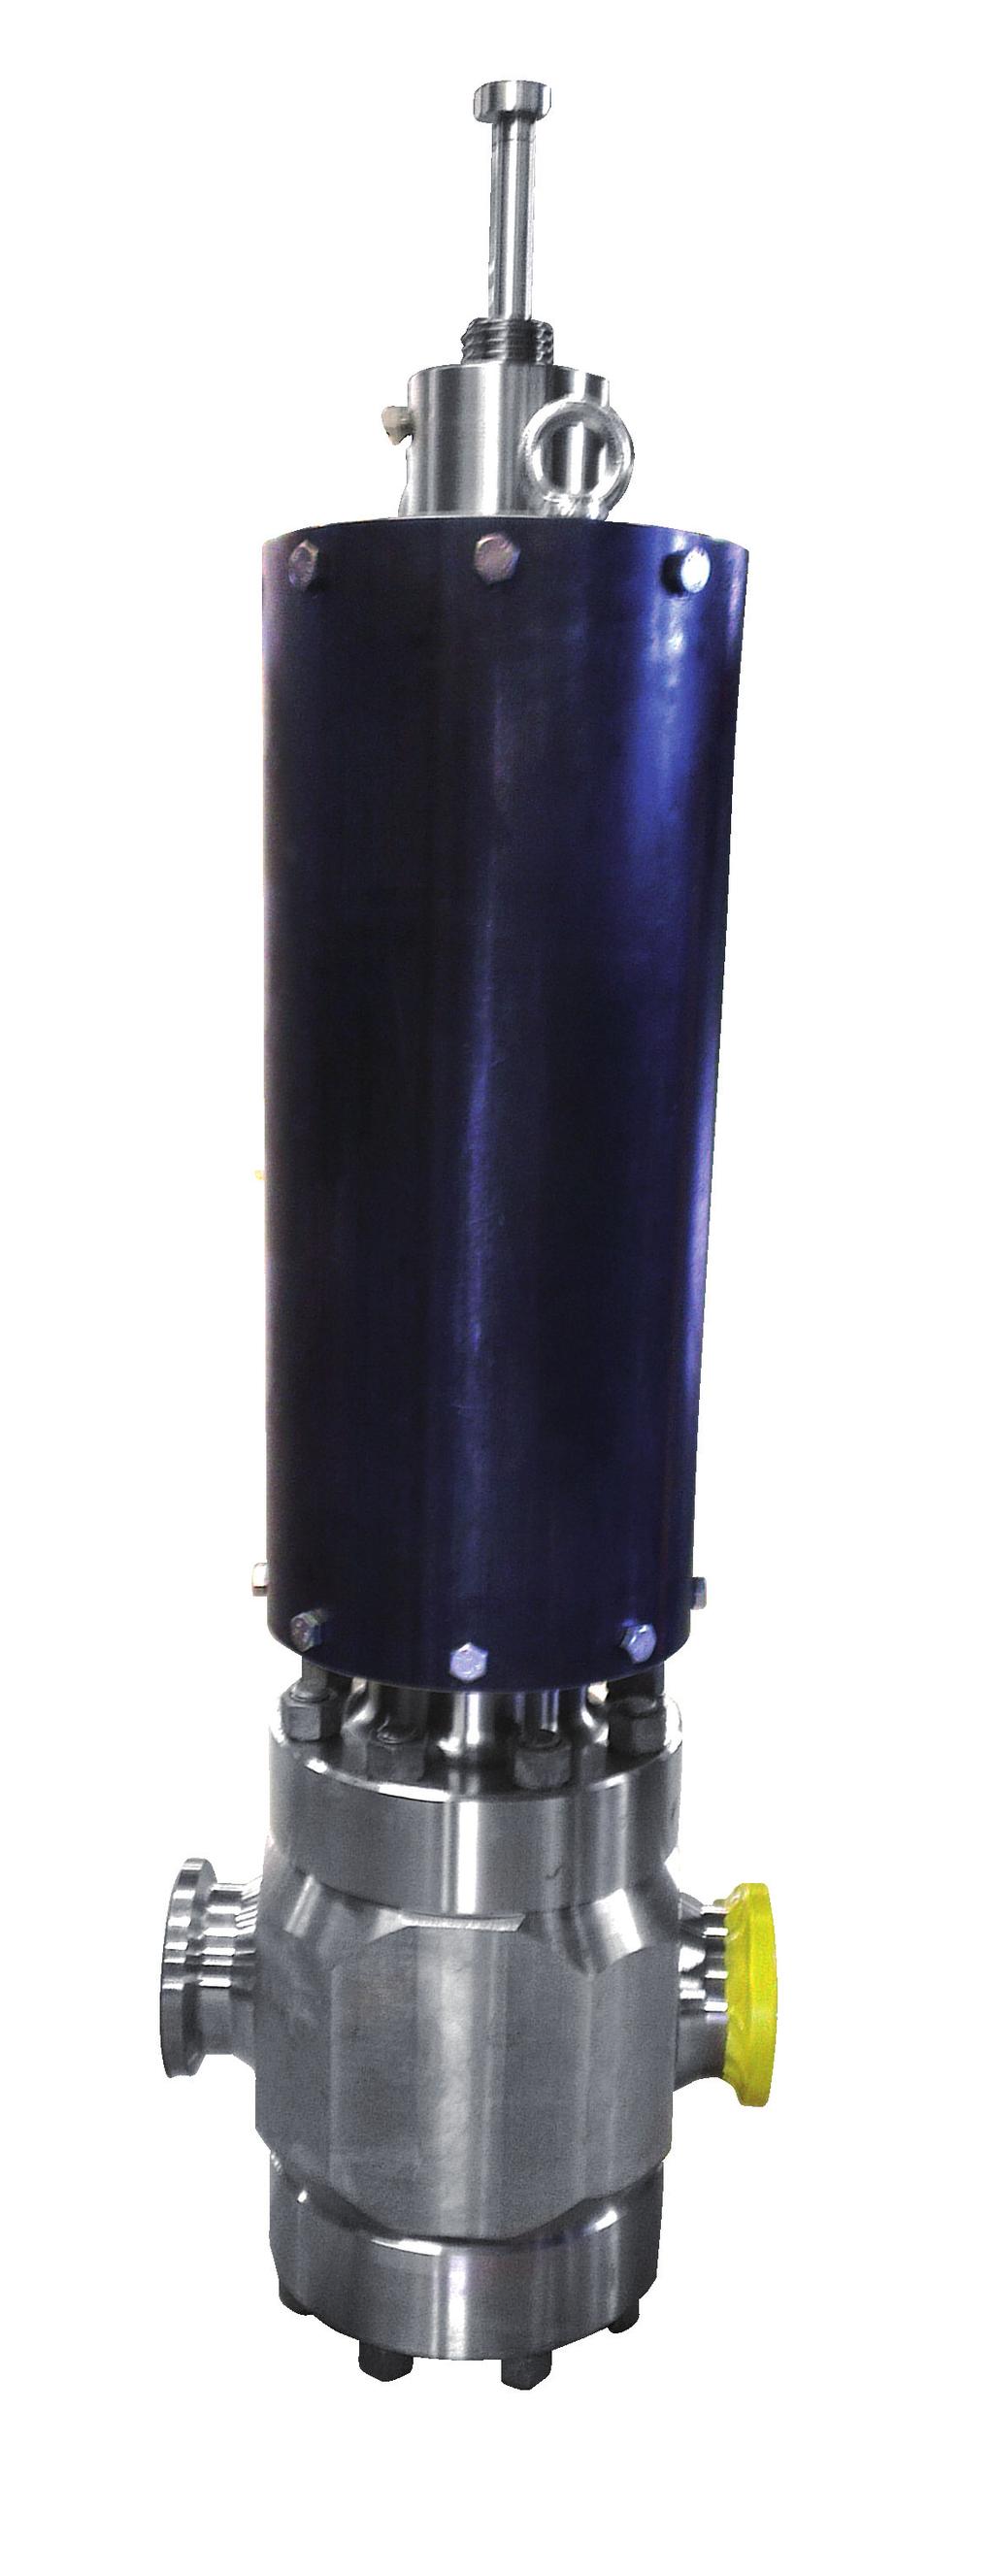 PAINT FINISH As standard, Type BLS steel actuators are finished with an offshore